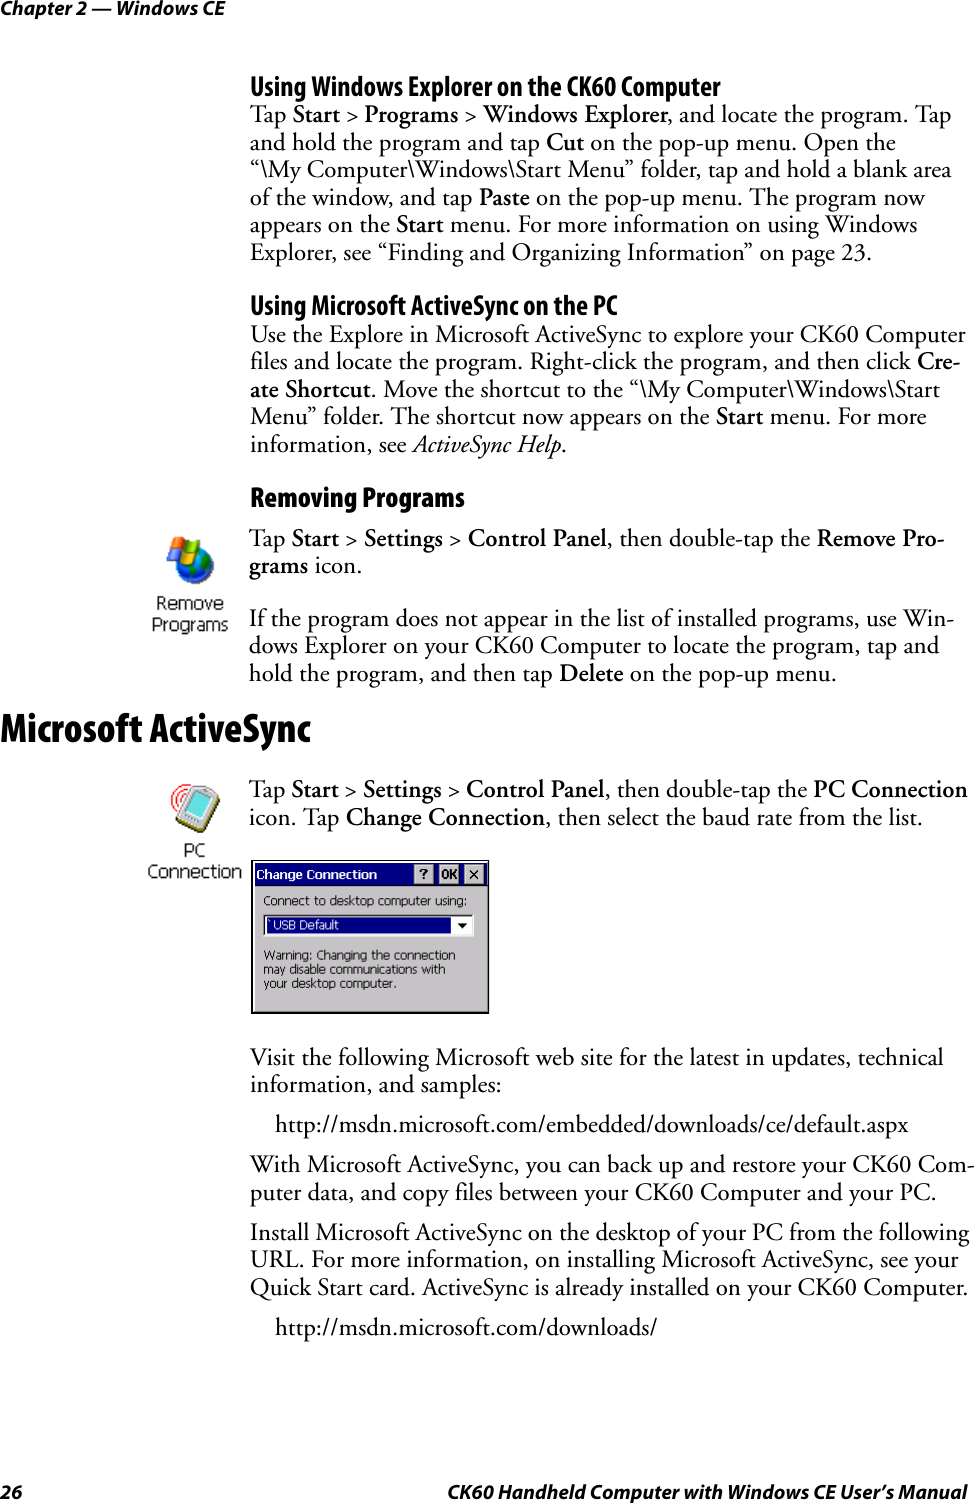 Chapter 2 — Windows CE26 CK60 Handheld Computer with Windows CE User’s ManualUsing Windows Explorer on the CK60 ComputerTap Start &gt; Programs &gt; Windows Explorer, and locate the program. Tap and hold the program and tap Cut on the pop-up menu. Open the “\My Computer\Windows\Start Menu” folder, tap and hold a blank area of the window, and tap Paste on the pop-up menu. The program now appears on the Start menu. For more information on using Windows Explorer, see “Finding and Organizing Information” on page 23.Using Microsoft ActiveSync on the PCUse the Explore in Microsoft ActiveSync to explore your CK60 Computer files and locate the program. Right-click the program, and then click Cre-ate Shortcut. Move the shortcut to the “\My Computer\Windows\Start Menu” folder. The shortcut now appears on the Start menu. For more information, see ActiveSync Help.Removing ProgramsMicrosoft ActiveSyncVisit the following Microsoft web site for the latest in updates, technical information, and samples:http://msdn.microsoft.com/embedded/downloads/ce/default.aspxWith Microsoft ActiveSync, you can back up and restore your CK60 Com-puter data, and copy files between your CK60 Computer and your PC. Install Microsoft ActiveSync on the desktop of your PC from the following URL. For more information, on installing Microsoft ActiveSync, see your Quick Start card. ActiveSync is already installed on your CK60 Computer.http://msdn.microsoft.com/downloads/Tap Start &gt; Settings &gt; Control Panel, then double-tap the Remove Pro-grams icon.If the program does not appear in the list of installed programs, use Win-dows Explorer on your CK60 Computer to locate the program, tap and hold the program, and then tap Delete on the pop-up menu.Tap Start &gt; Settings &gt; Control Panel, then double-tap the PC Connection icon. Tap Change Connection, then select the baud rate from the list.